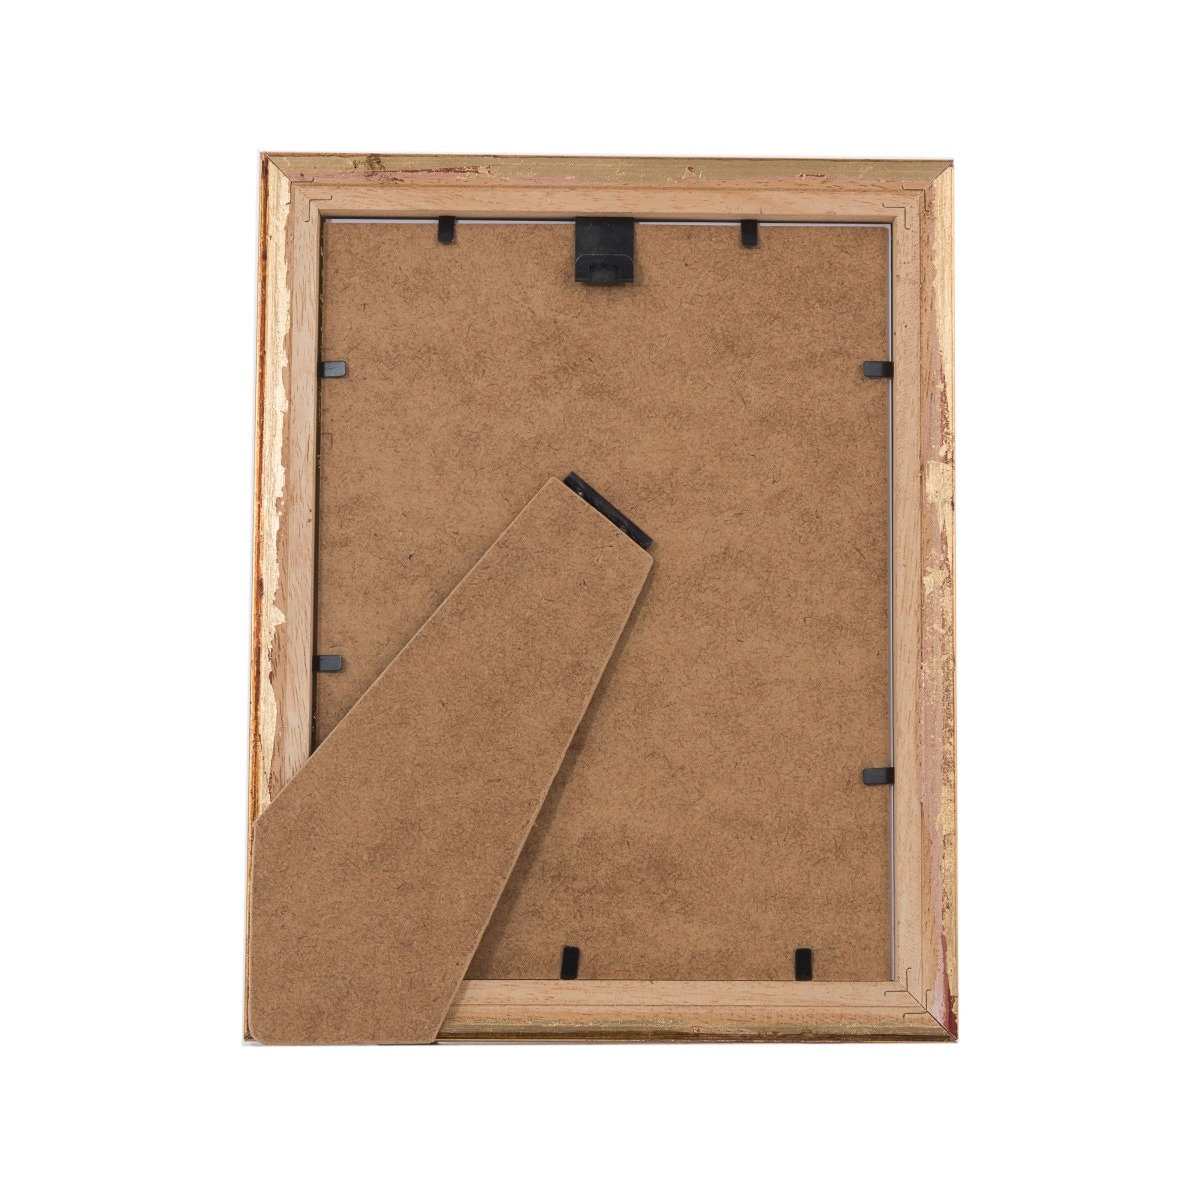 8x6 Gold Frame 8x6 Photo Frame Gold 8 X 6 Inch Gold Picture Frame Natural  Wood 6x8 Picture Frames Wooden Gold 8x6 Photo Frames 